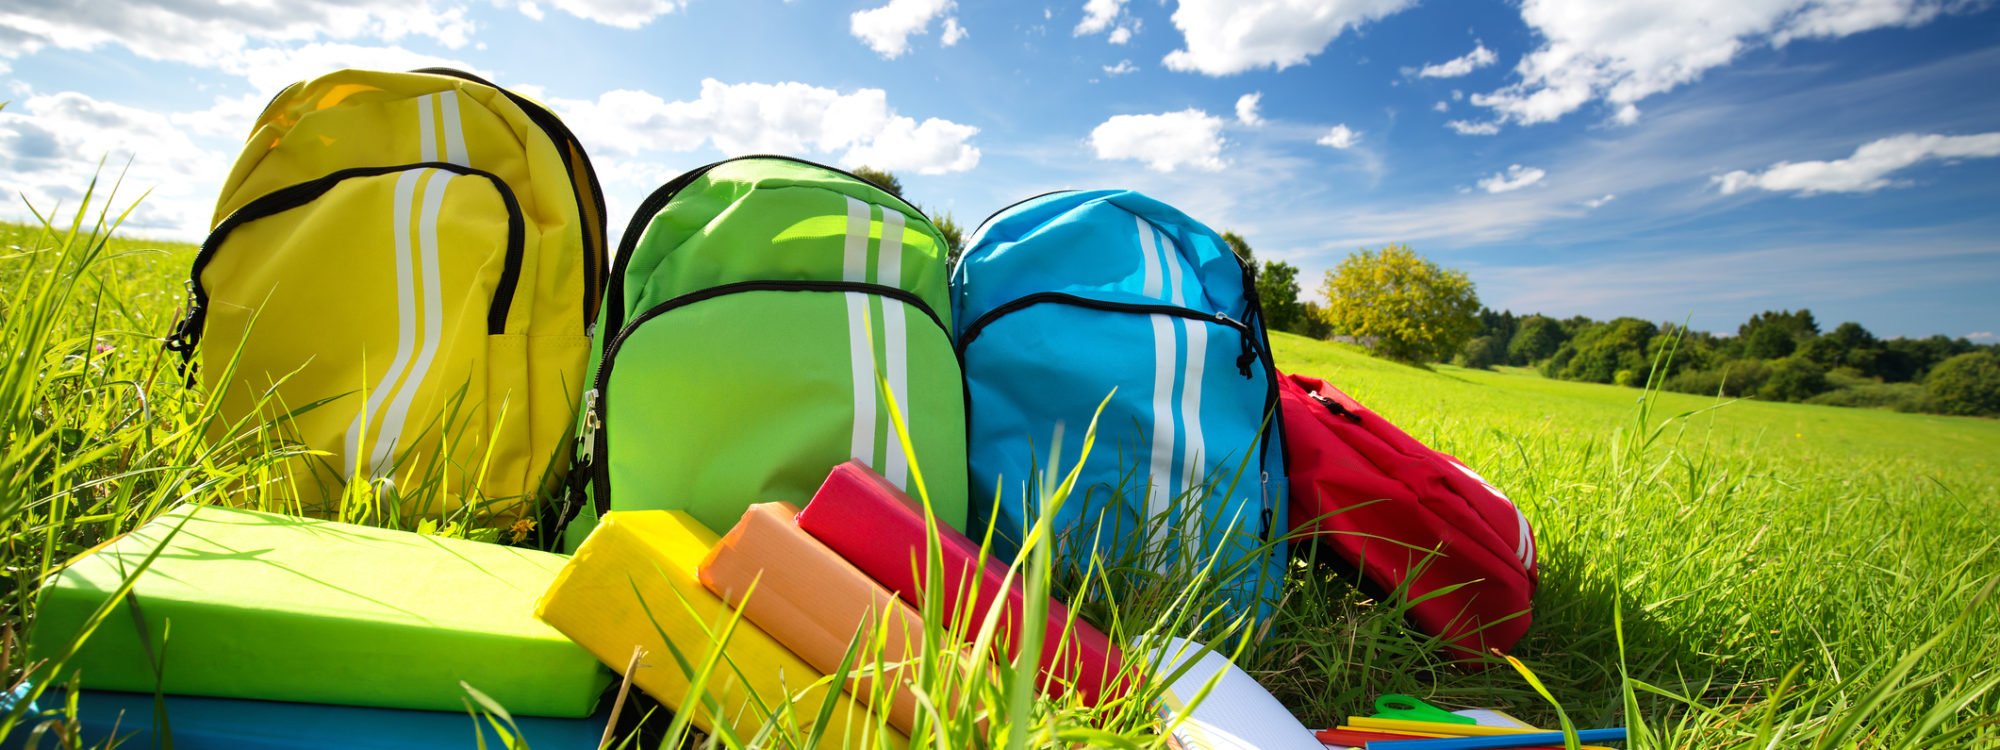 Group of colourful backpacks in a grassy meadow on a sunny day